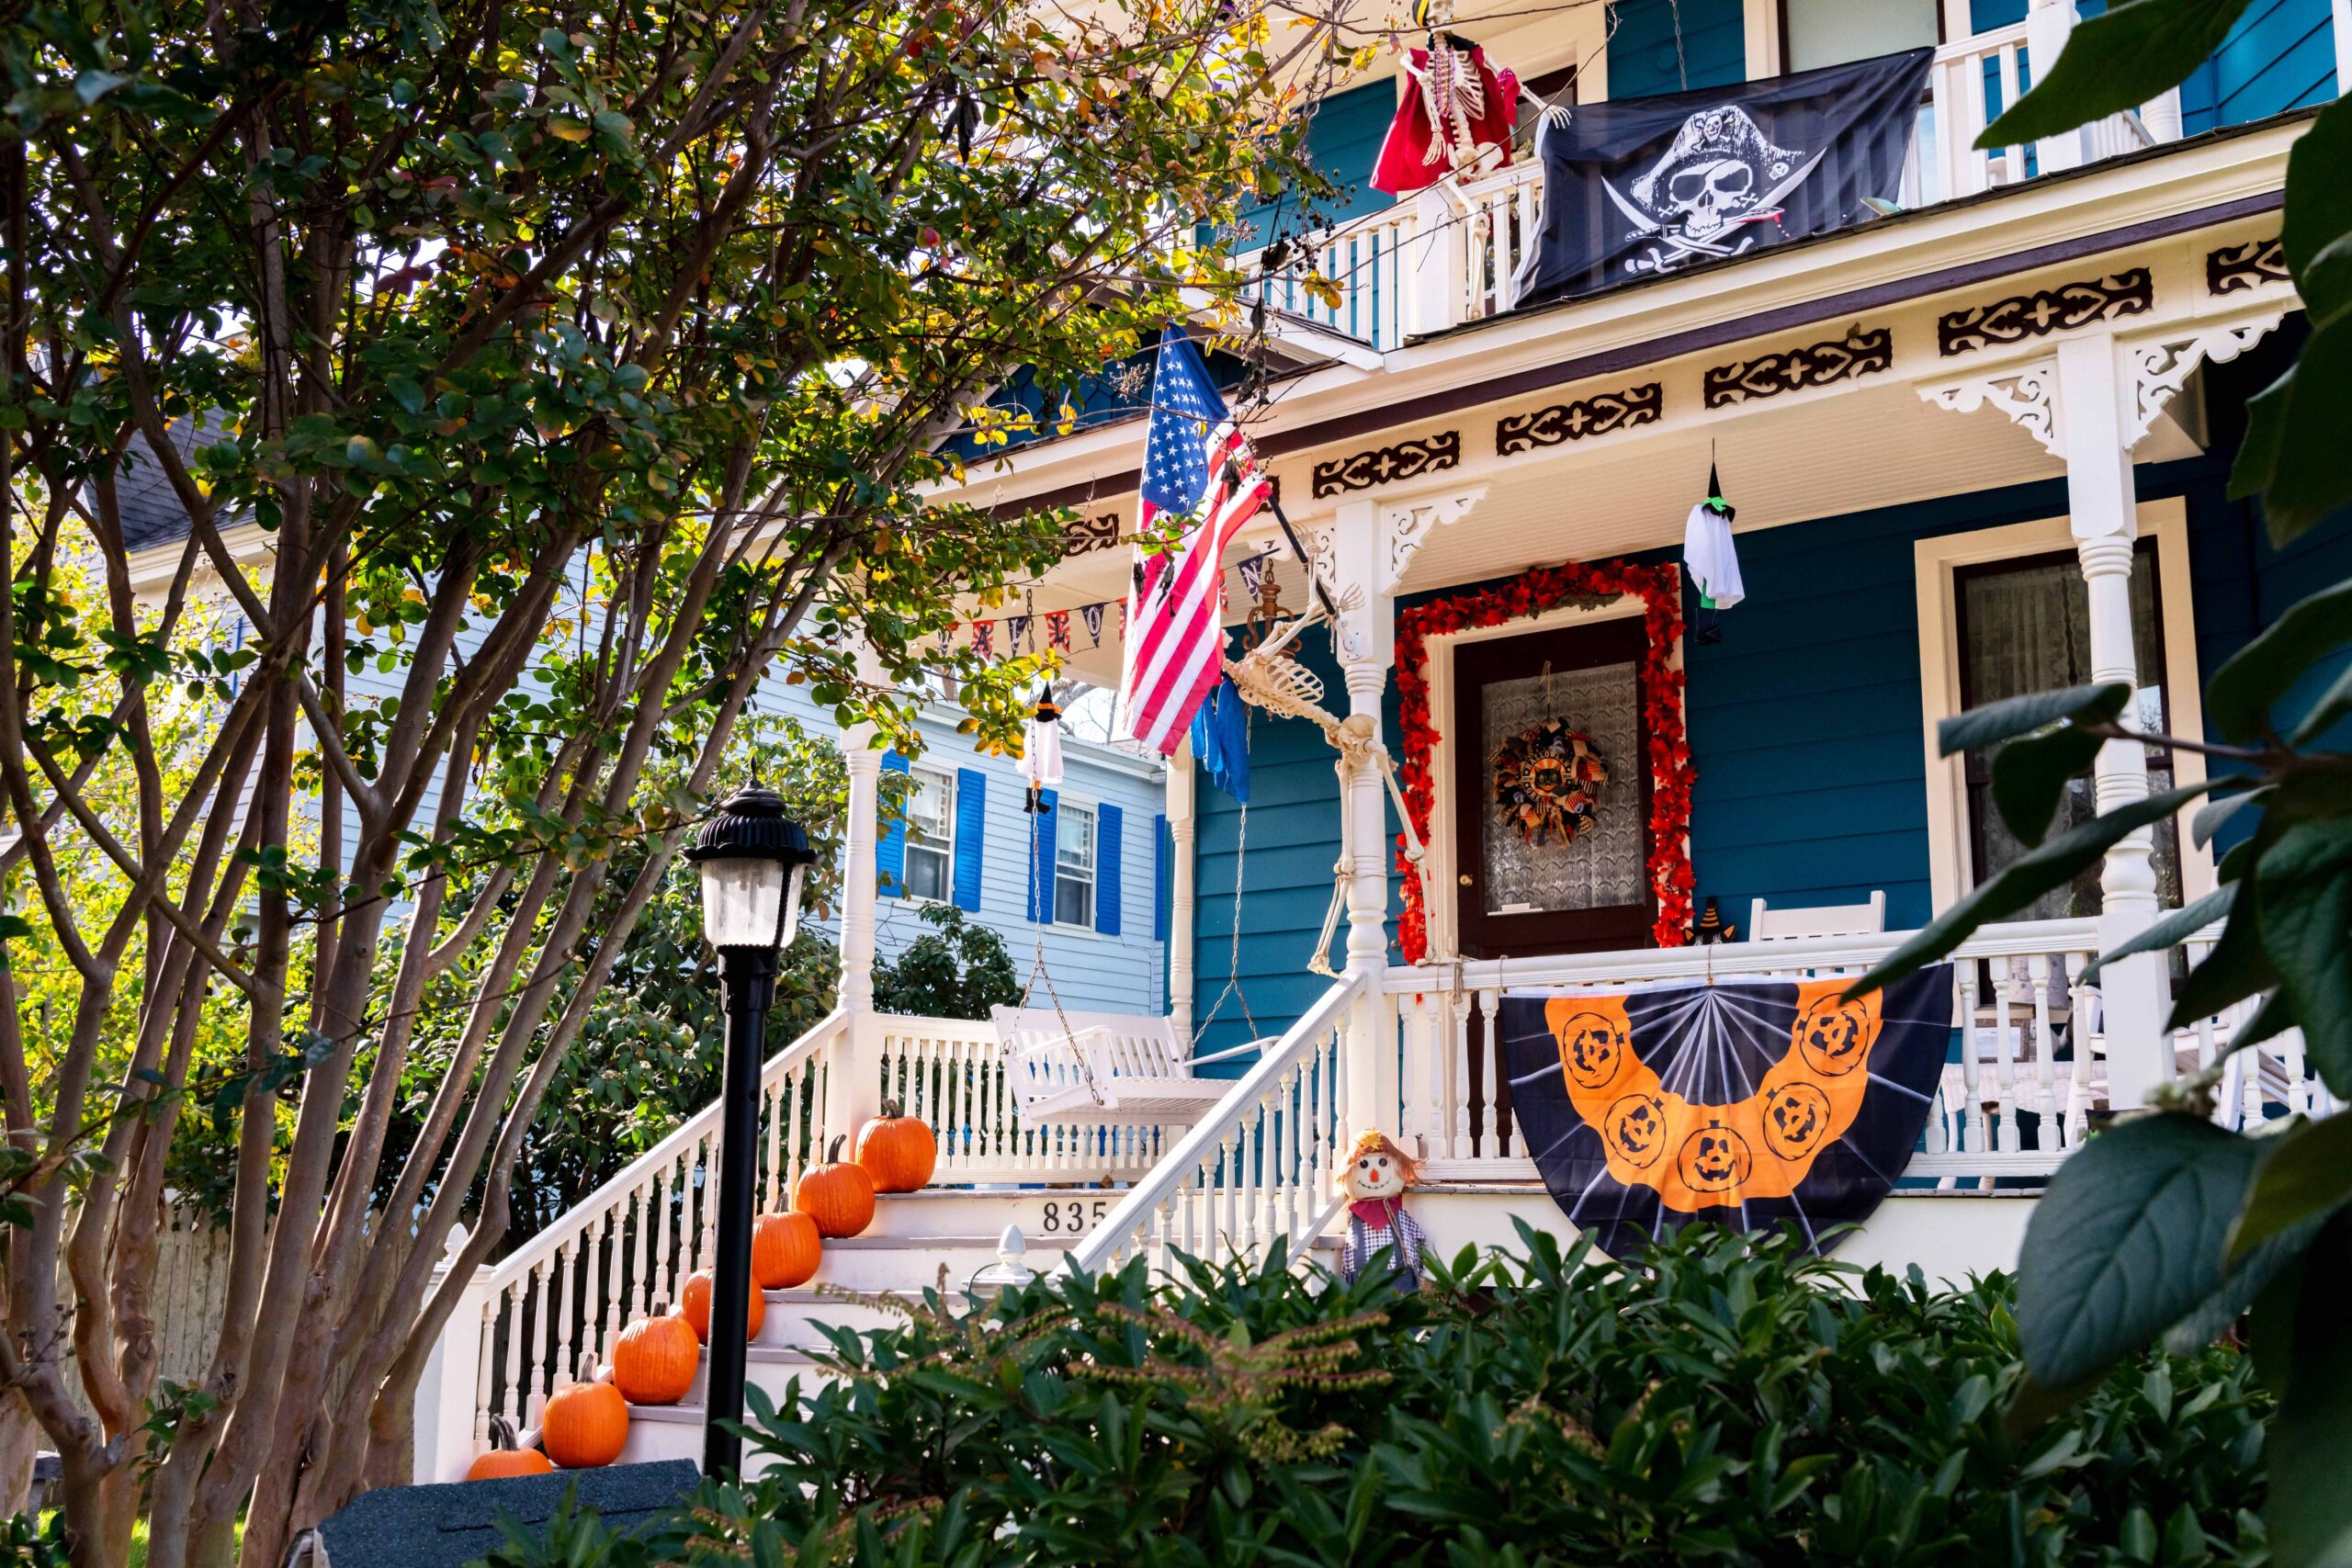 Pumpkins, skeletons, and other halloween decorations on the porch of a teal Victorian home on a sunny day